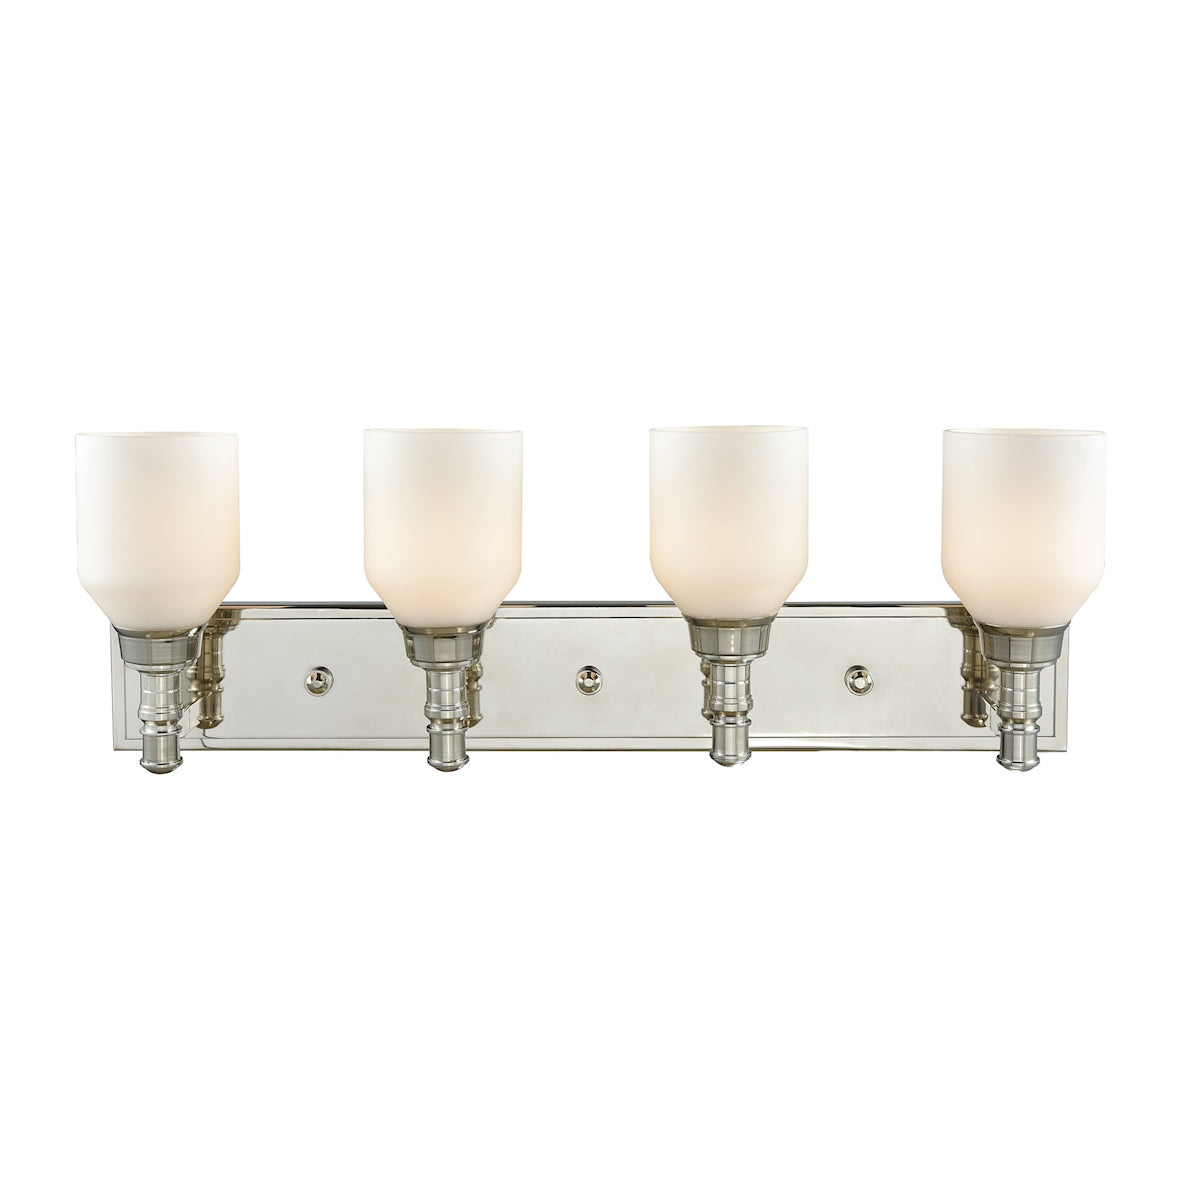 ELK Lighting 32273/4 Baxter 4-Light Vanity Lamp in Polished Nickel with Opal White Glass